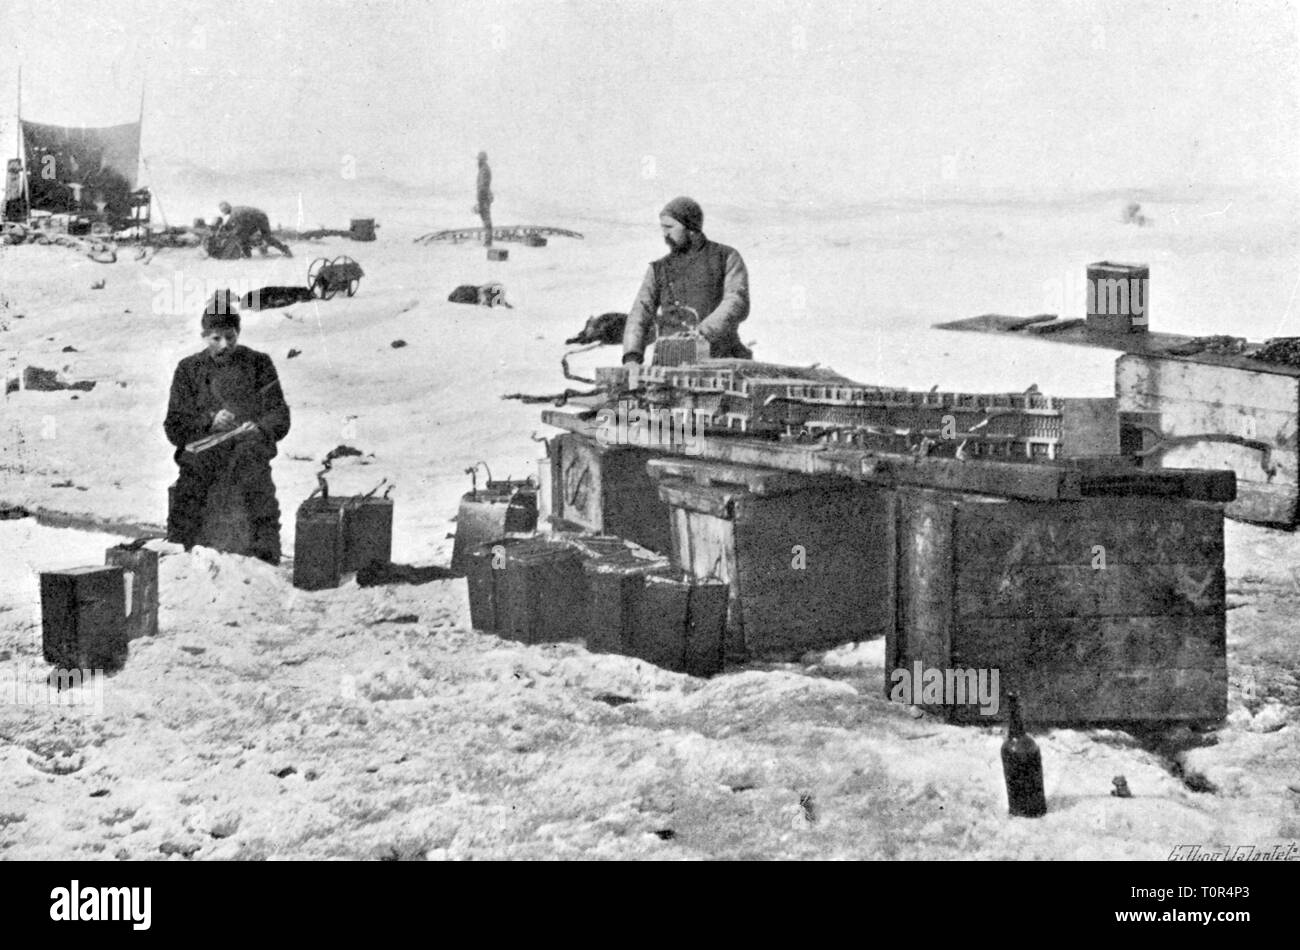 expedition, polar expedition, Fram expedition 1893 - 1896, cleaning the rechargeable batteries of the 'Fram', from: Fridtjof Nansen, 'In Nacht und Eis', volume I, Leipzig, 1897, 19th century, expedition report, report, reports, travel, travels, research, discovery, discoveries, participant, participants, members, member, crew, crews, works, working, repair, repairing, maintenances, maintain, service, maintaining, cleansing, cleanup, cleaning, clean, energy supply, power supply, supply of energy, energy, energies, half length, standing, maintenanc, Additional-Rights-Clearance-Info-Not-Available Stock Photo